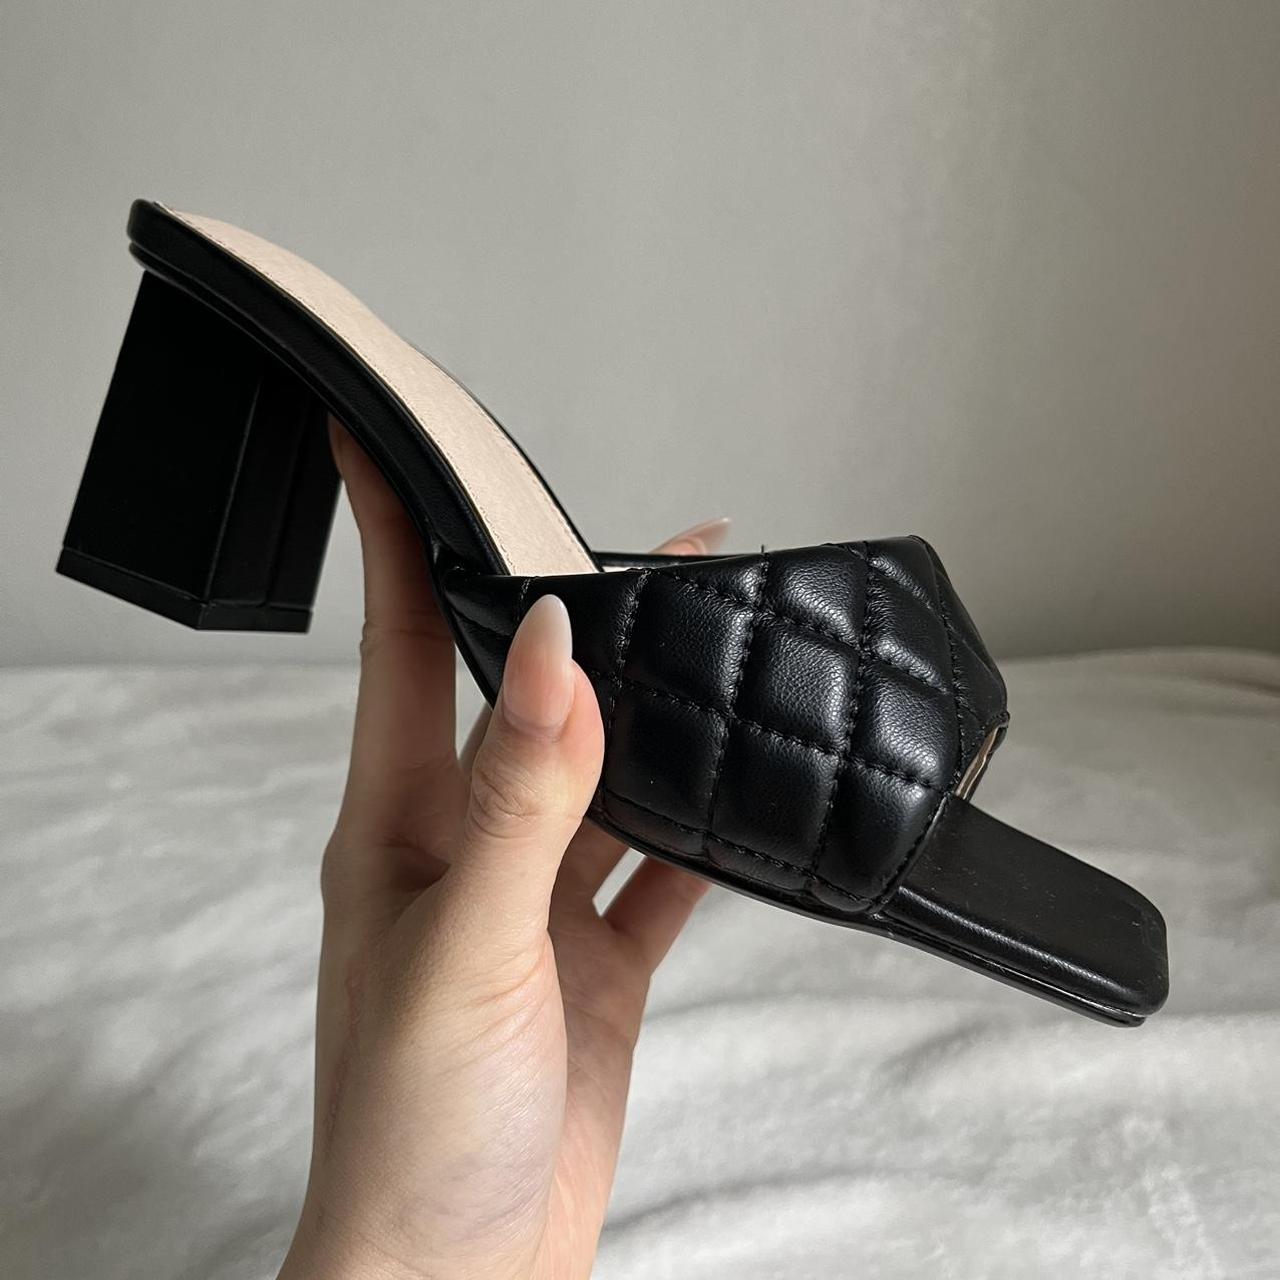 urban outfitters callie quilted heeled mule sandal - - Depop